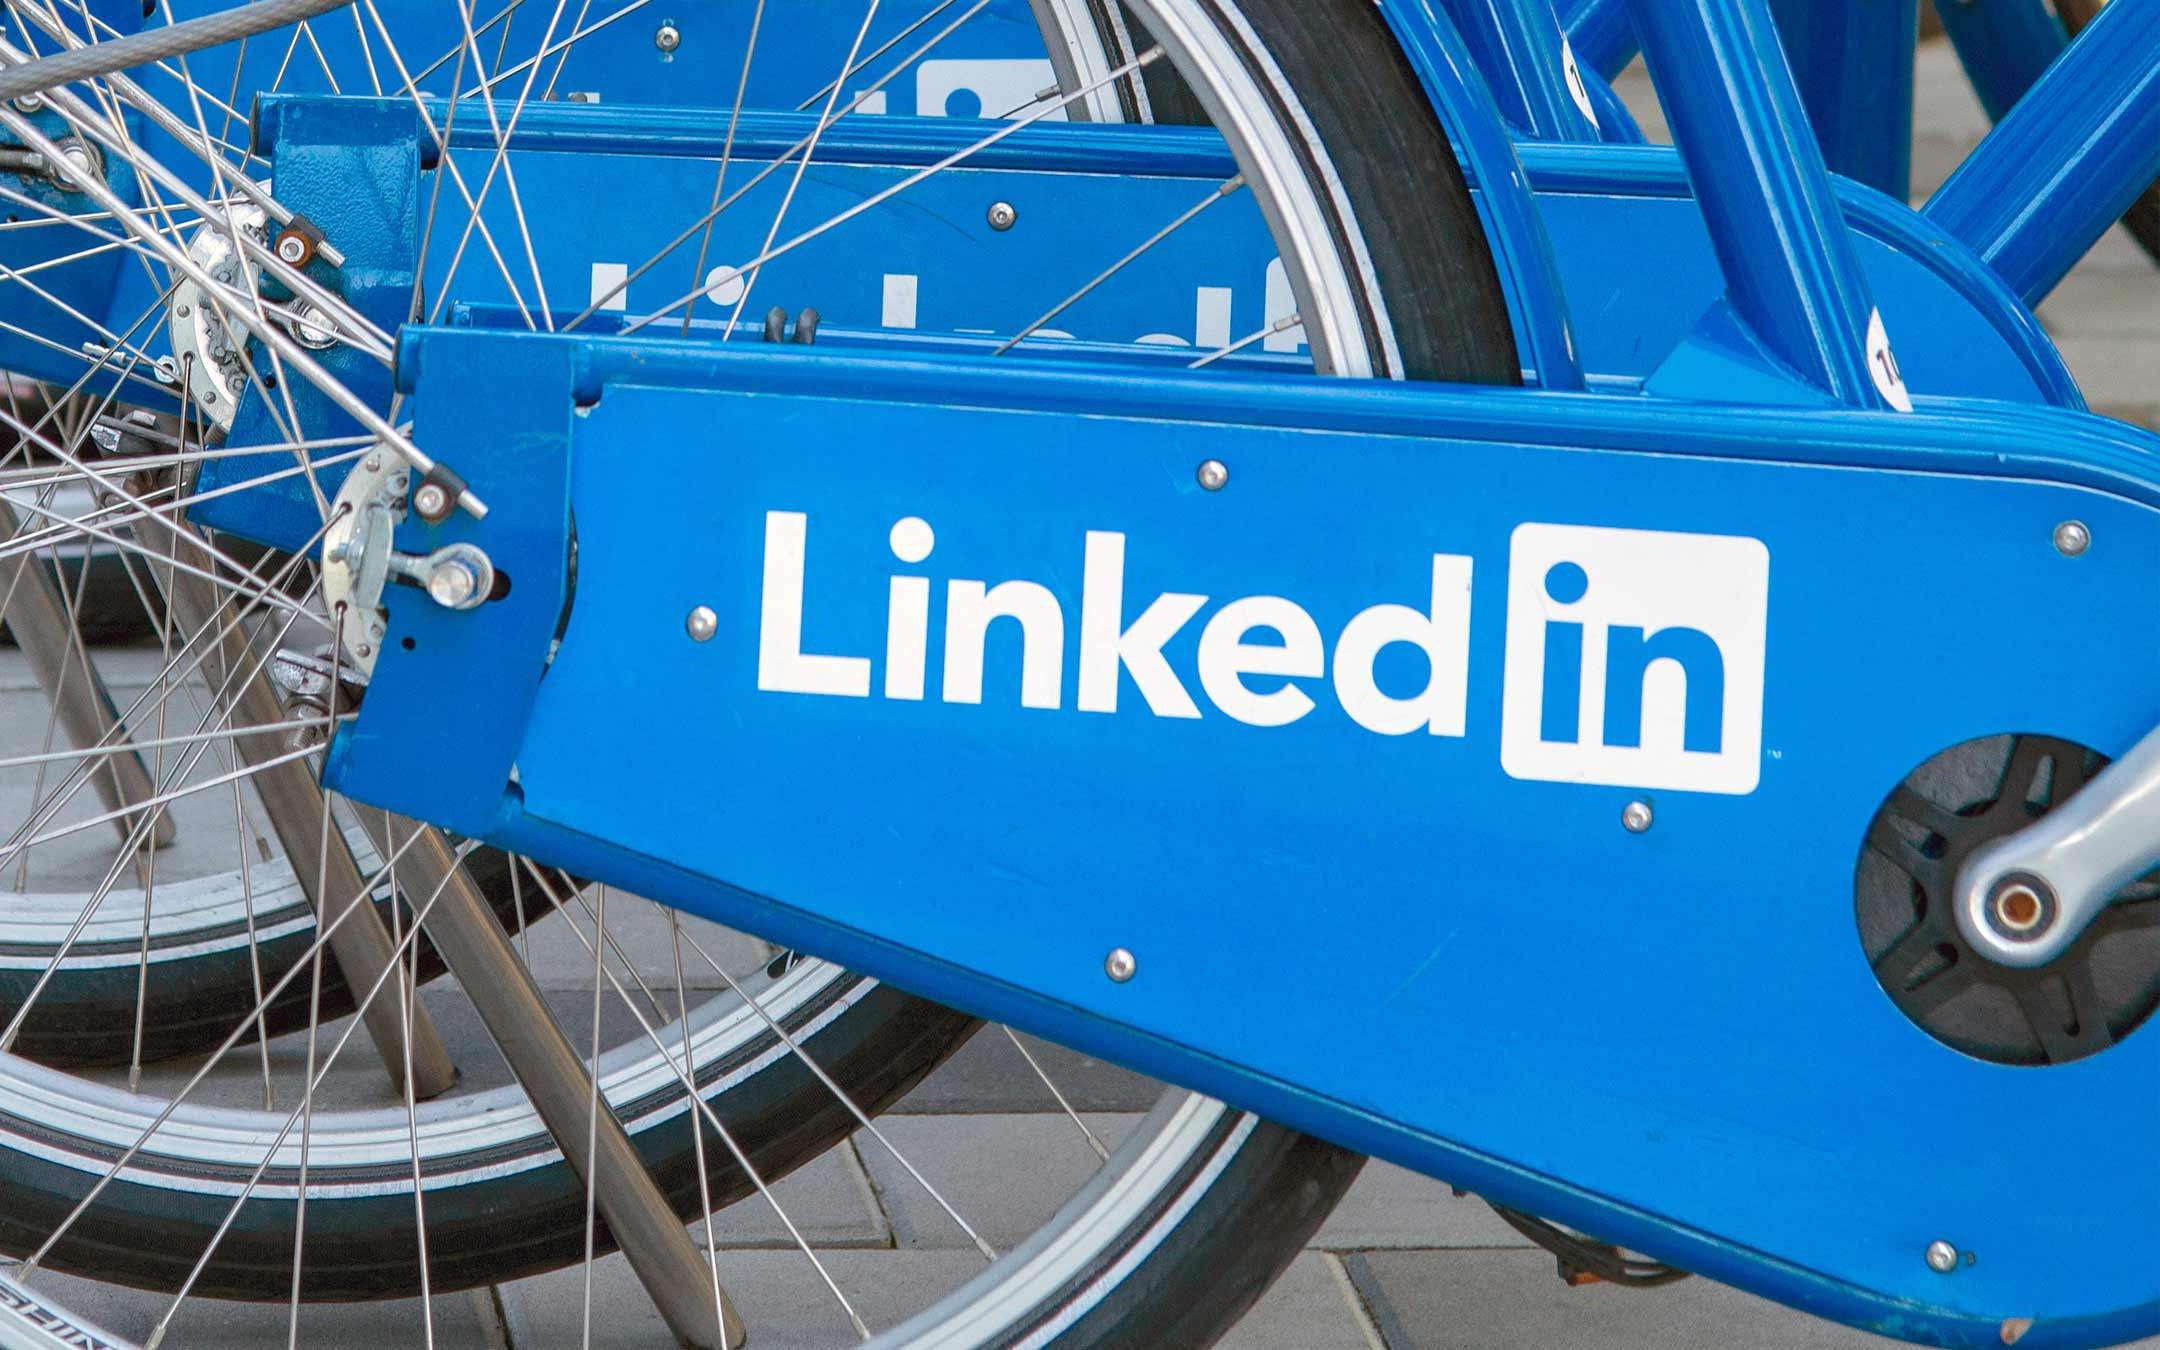 LinkedIn: the work is (and will be) increasingly greener